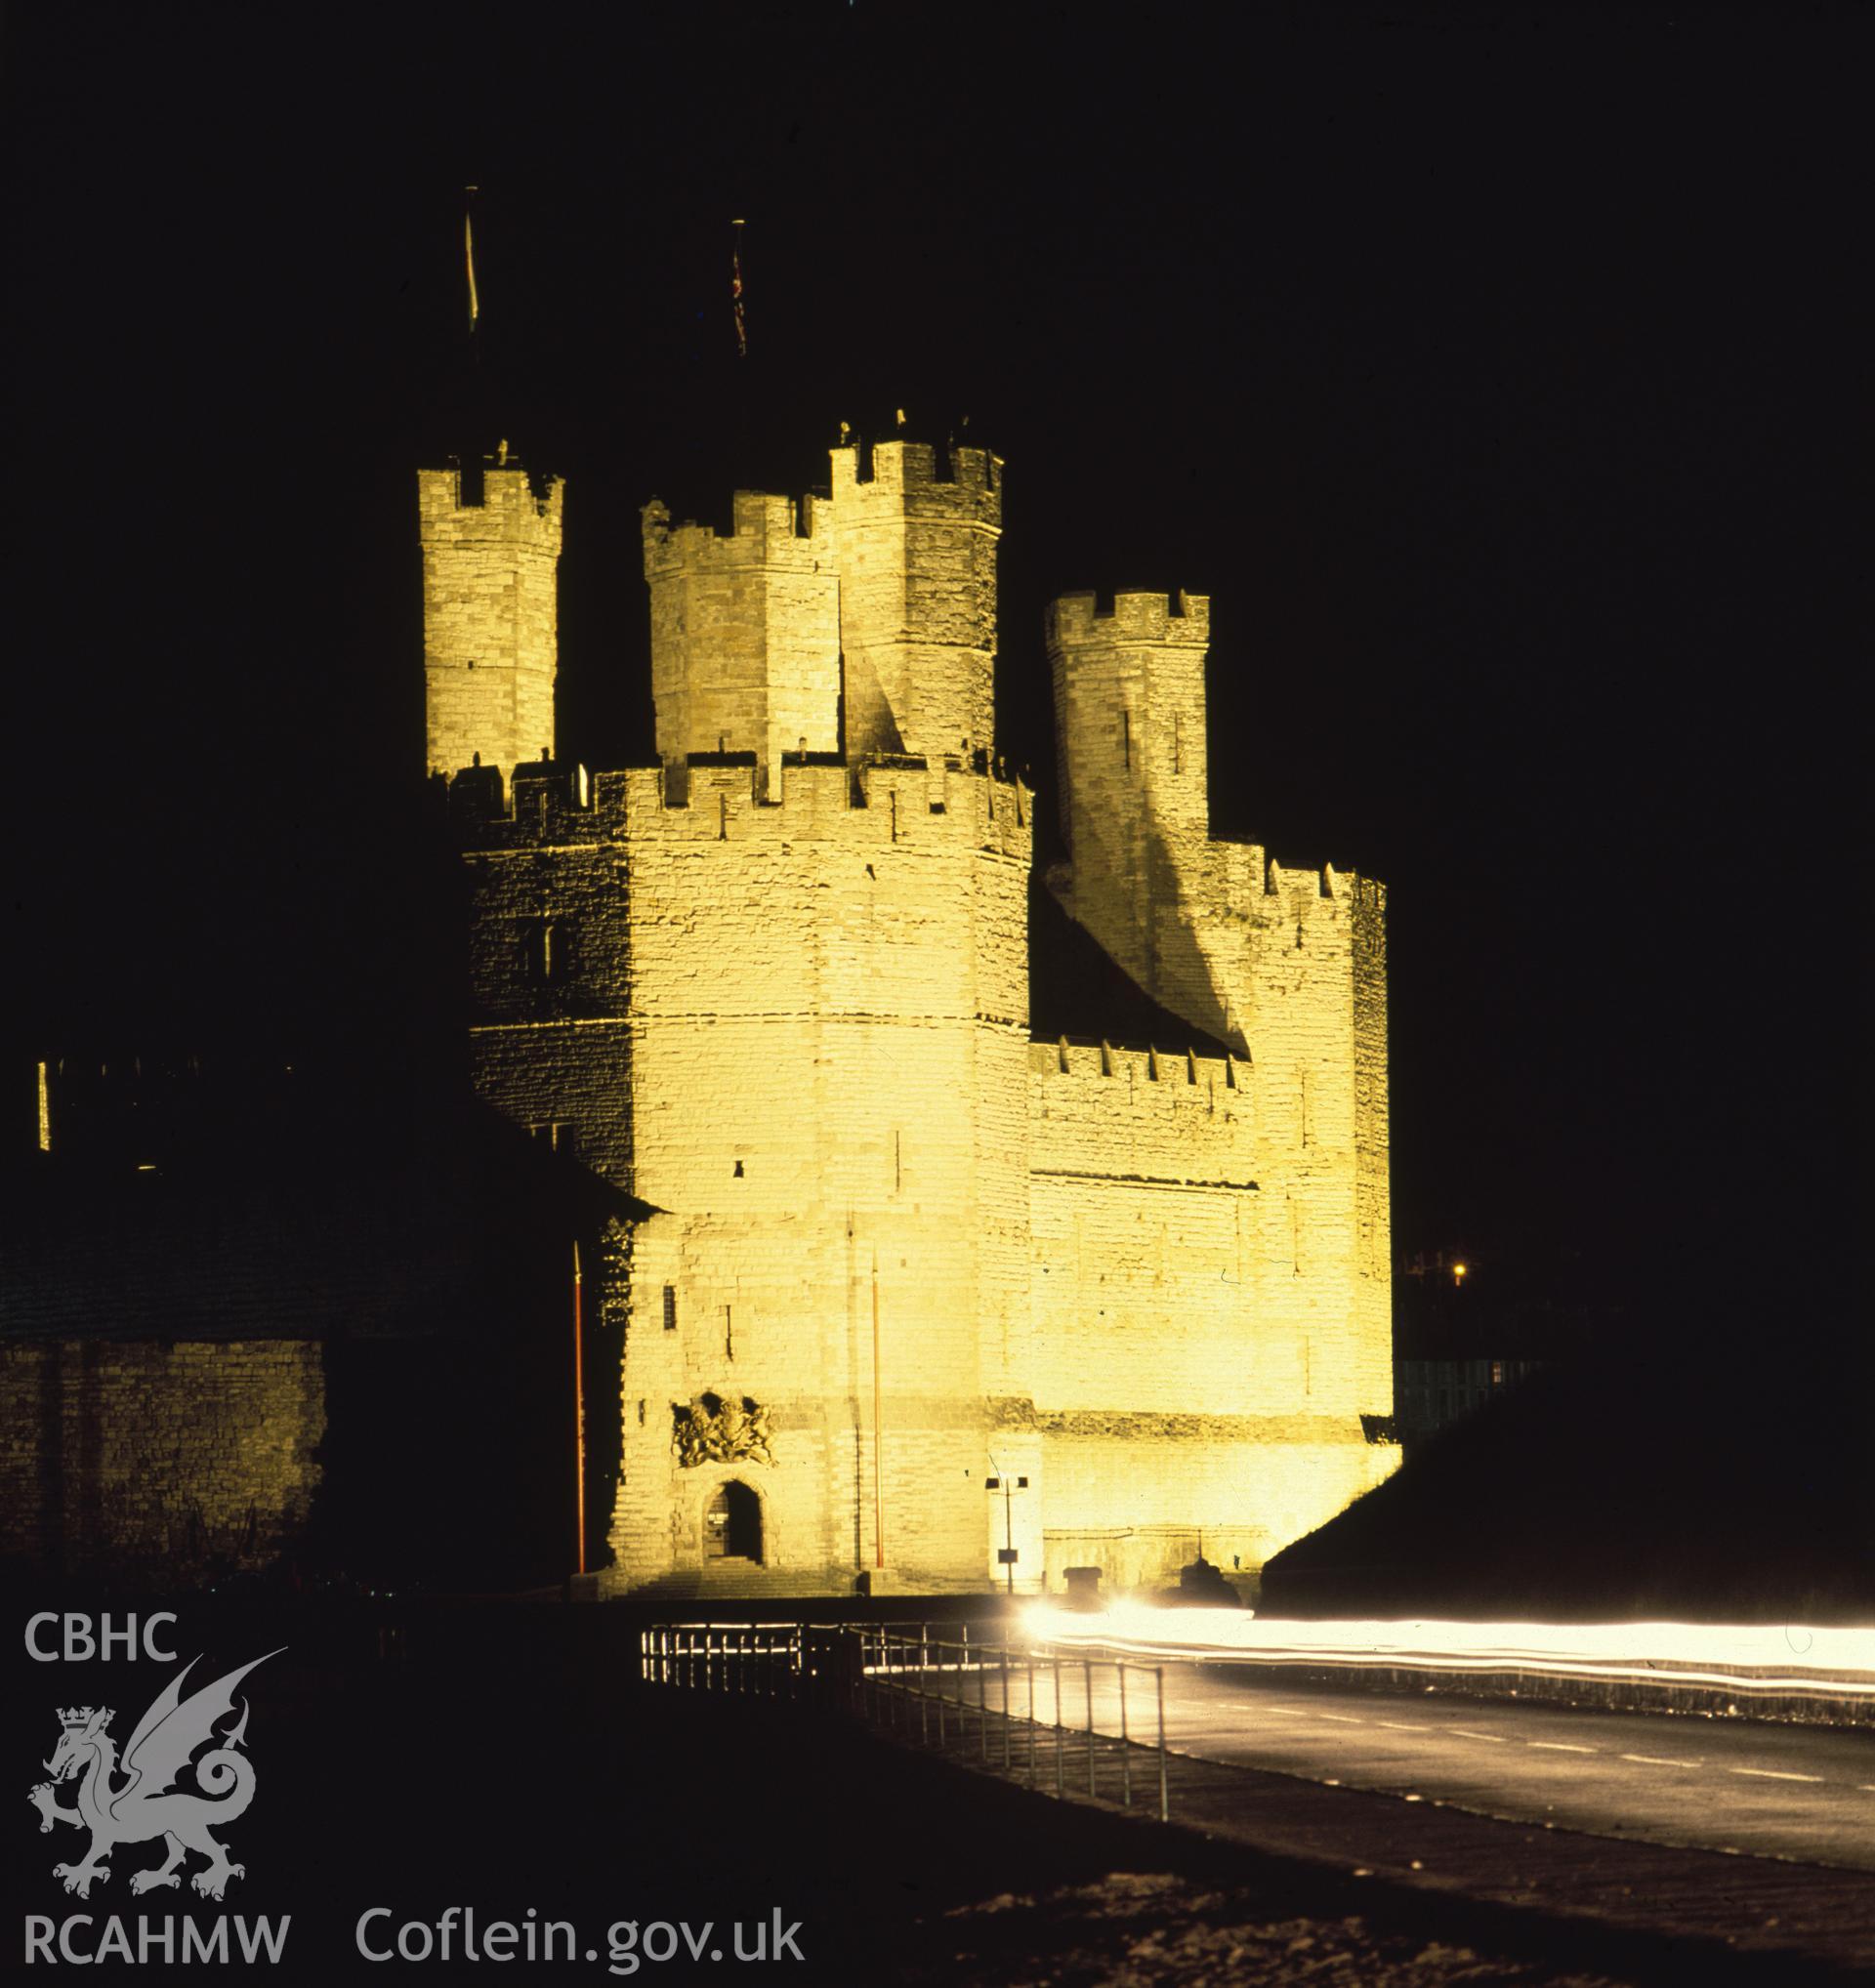 1 colour transparency showing view of Caernarfon Castle at night, undated; collated by the former Central Office of Information.